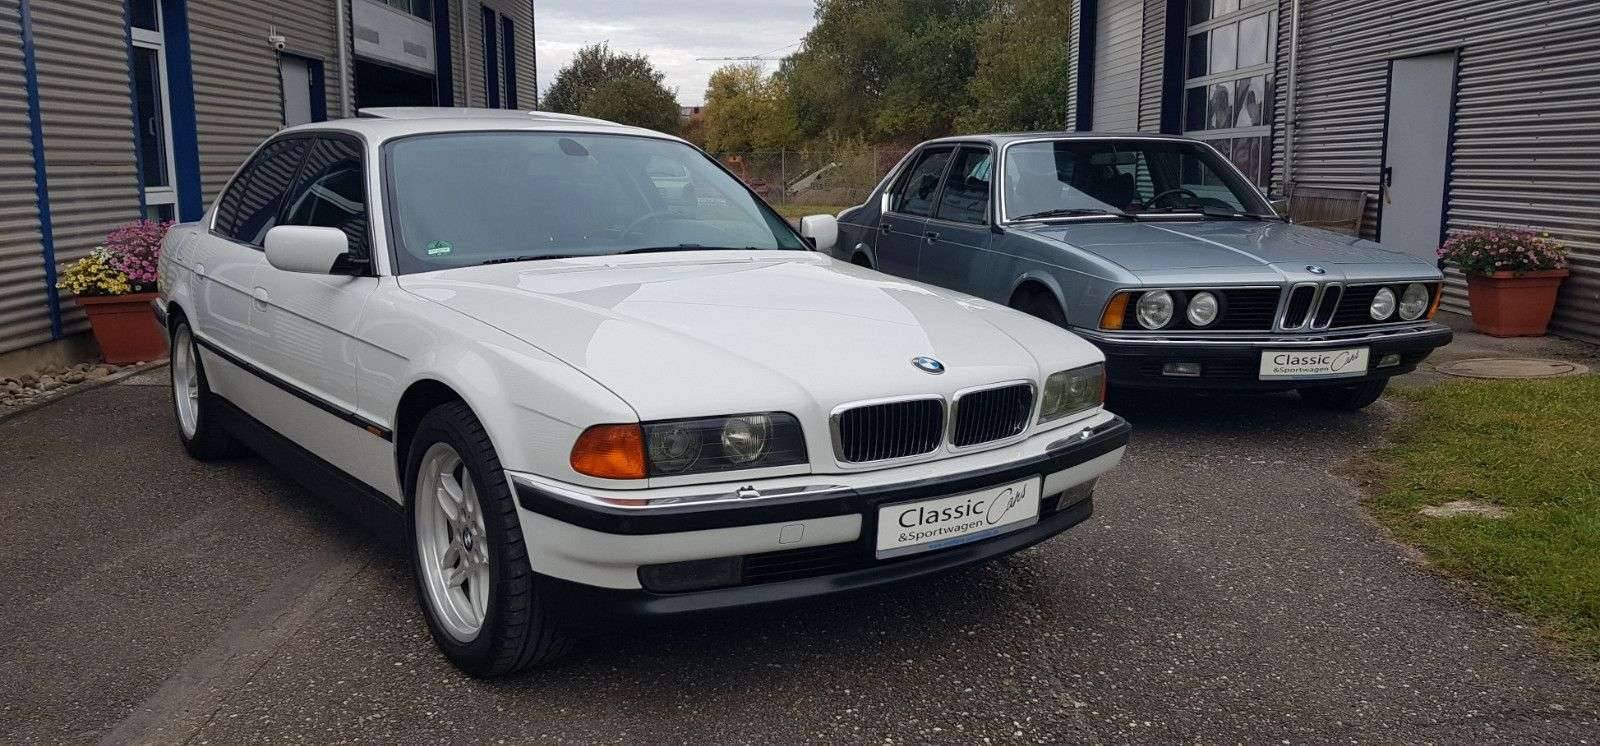 BMW 7 Series E 38 Classic Cars for Sale - Classic Trader